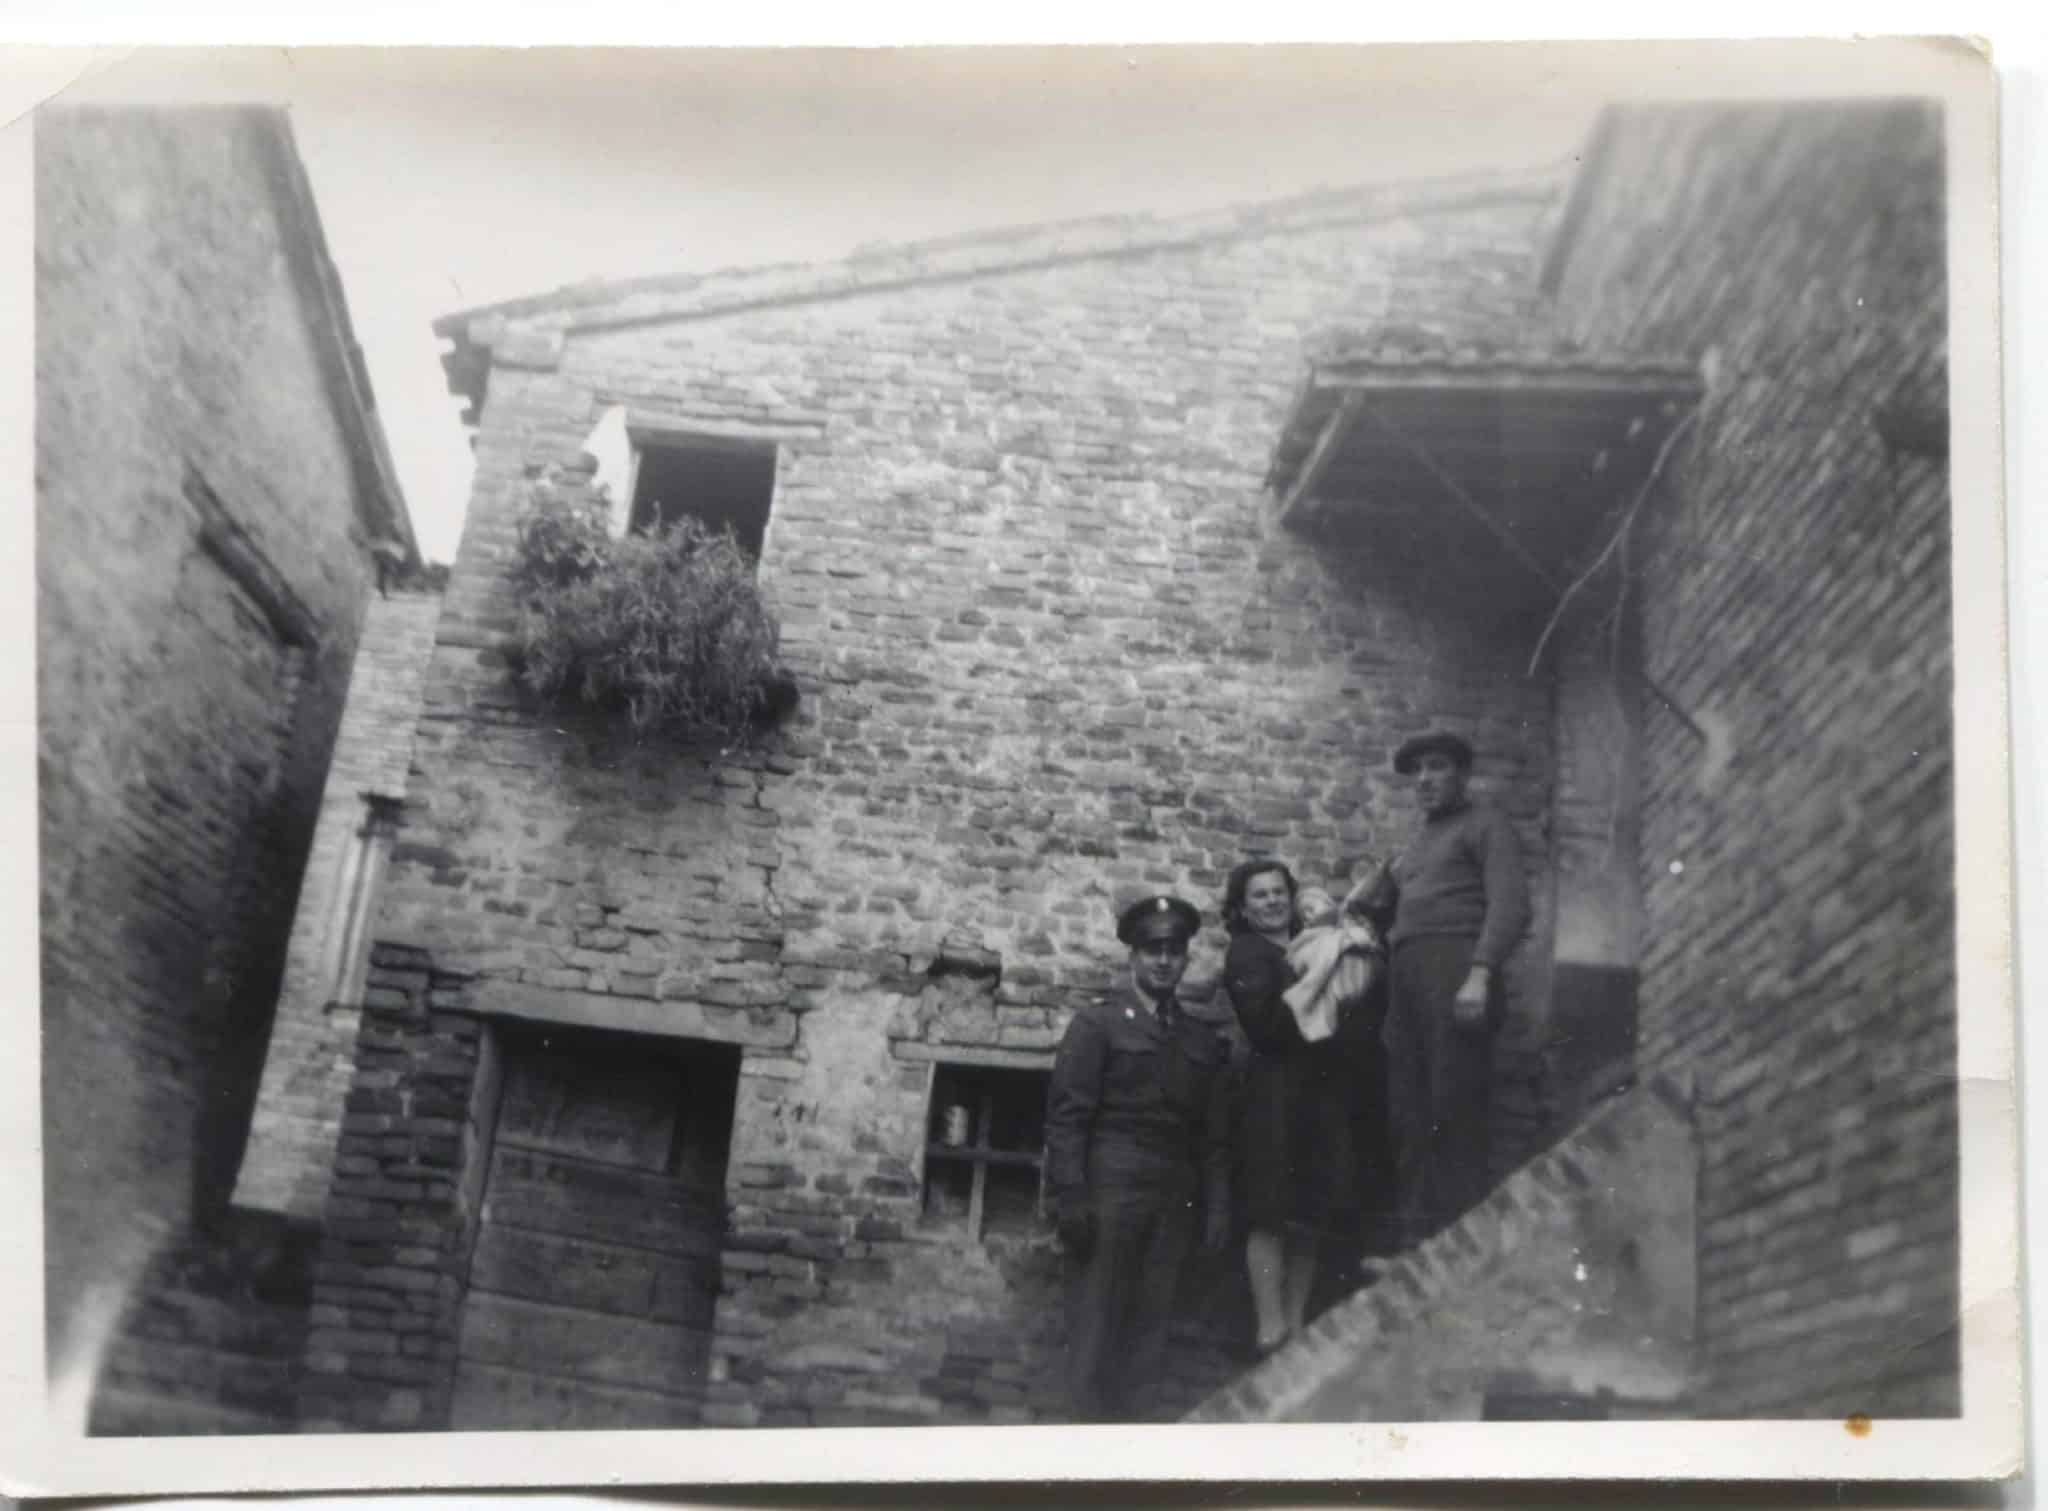 Image of an old stone house where four members of the Talevi stand outside on a staircase.